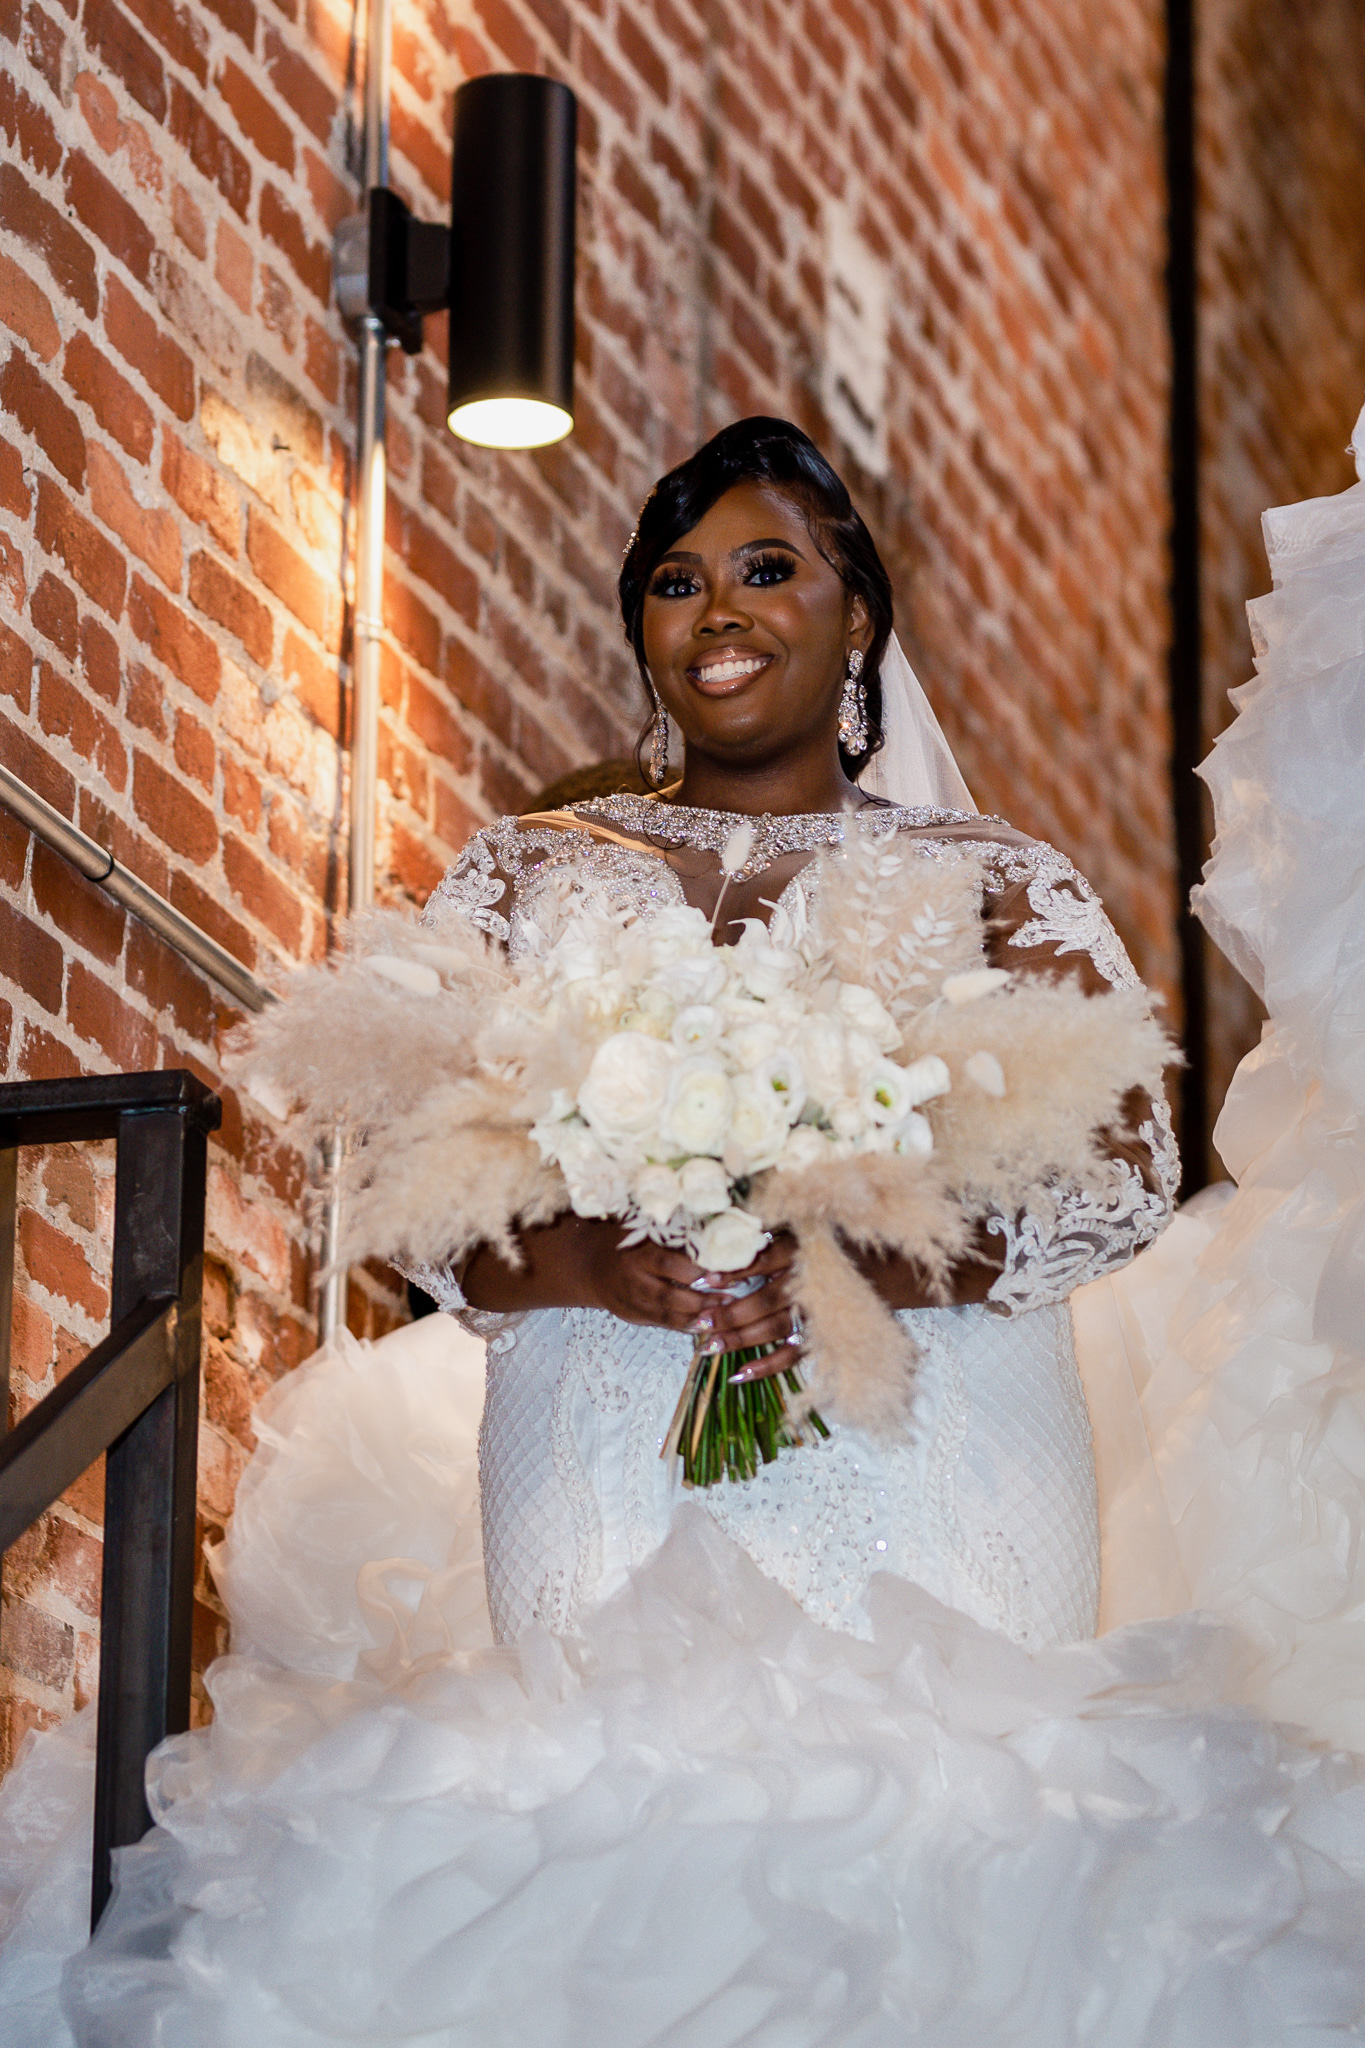 Stunning Boho Bride holding boutique in hand, with a huge smile on her face!